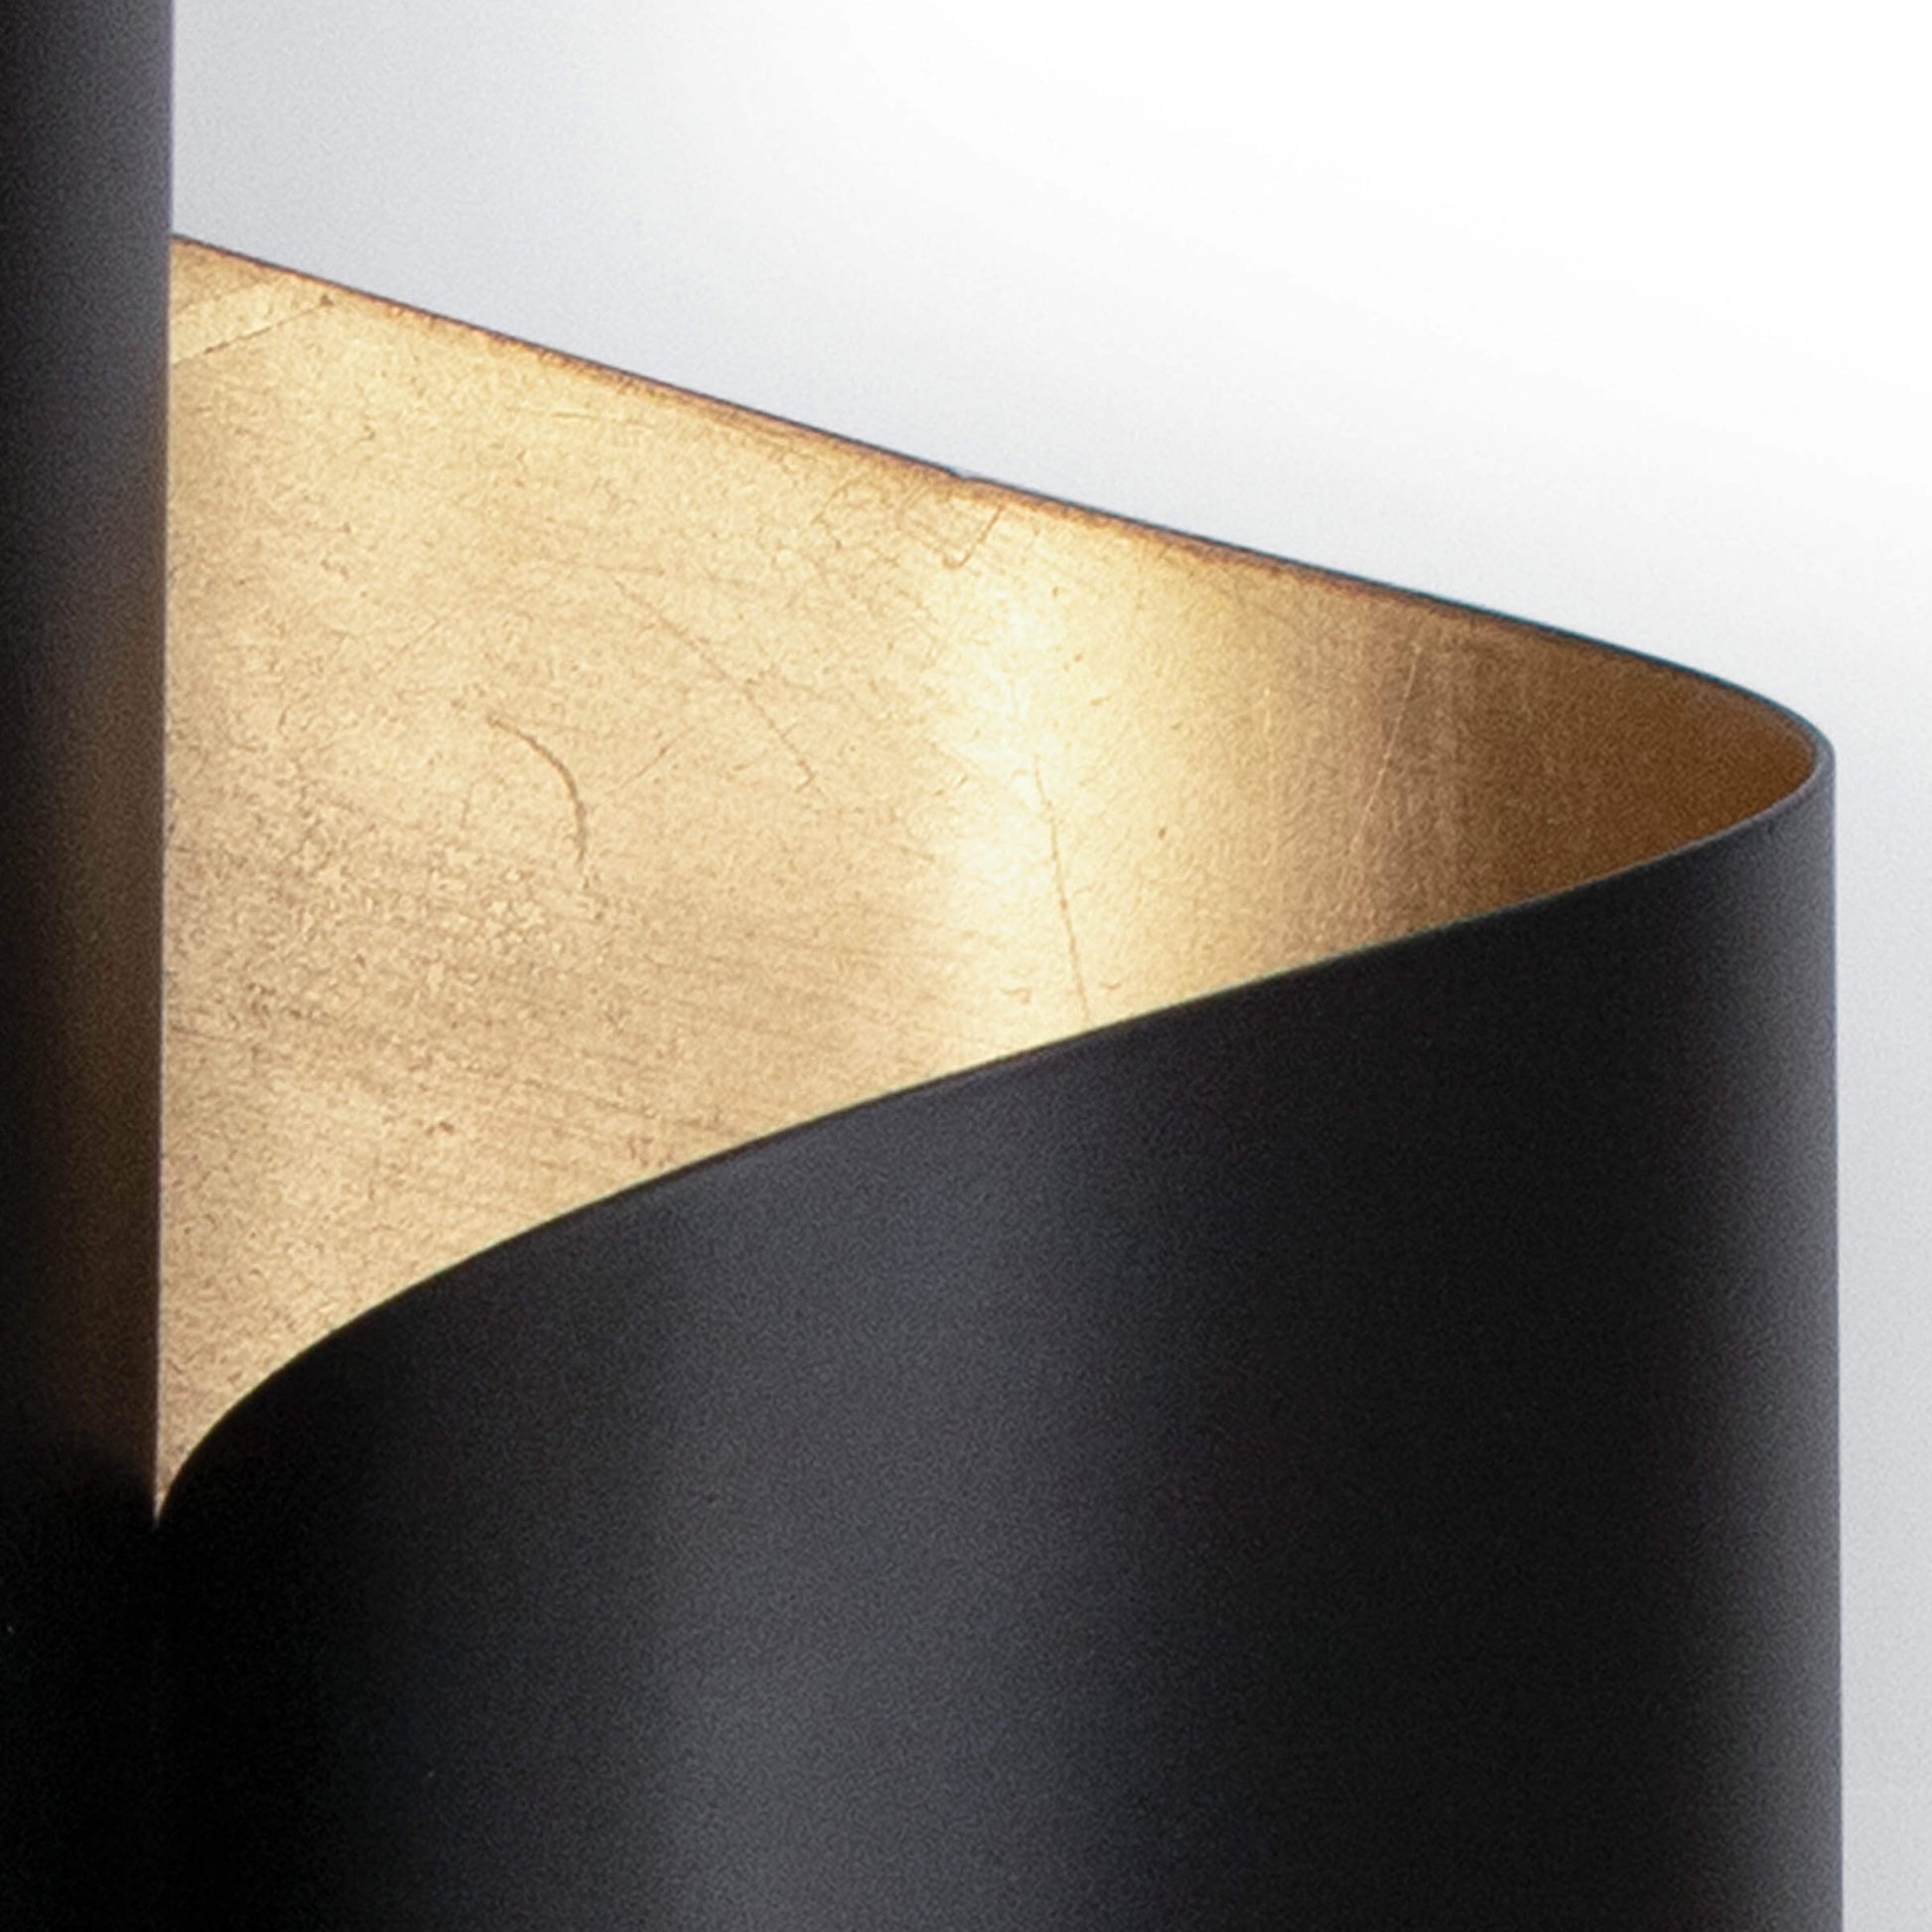 Folio Sconce in Black and Gold by Regina Andrew